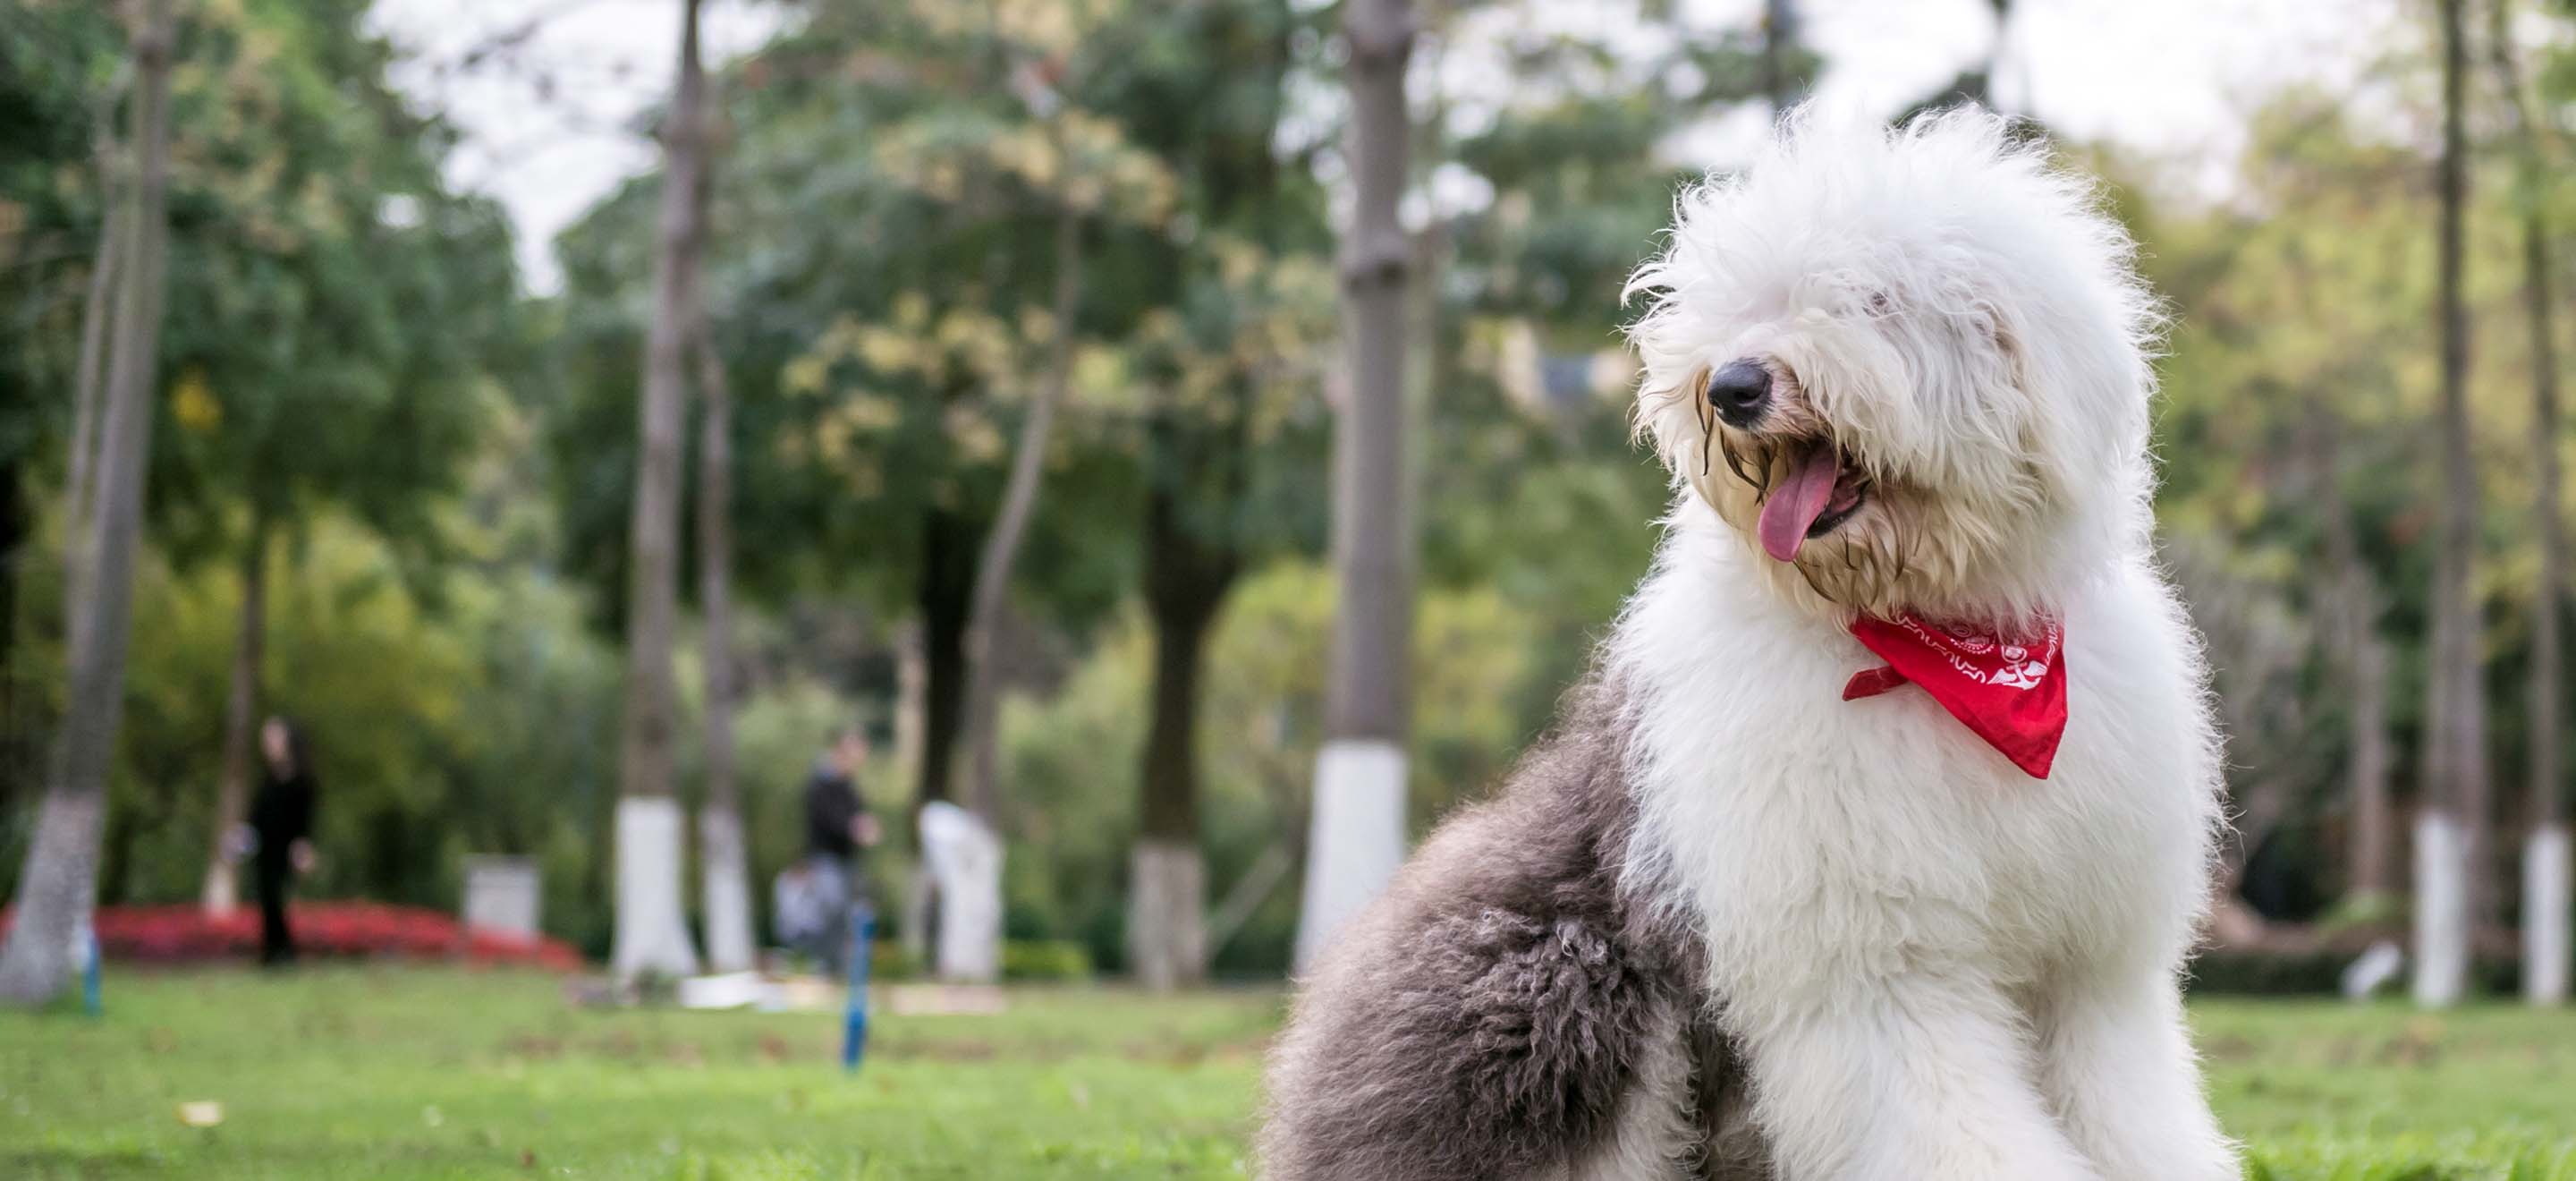 A Old English Sheepdog wearing a red neck scarf standing in a park image